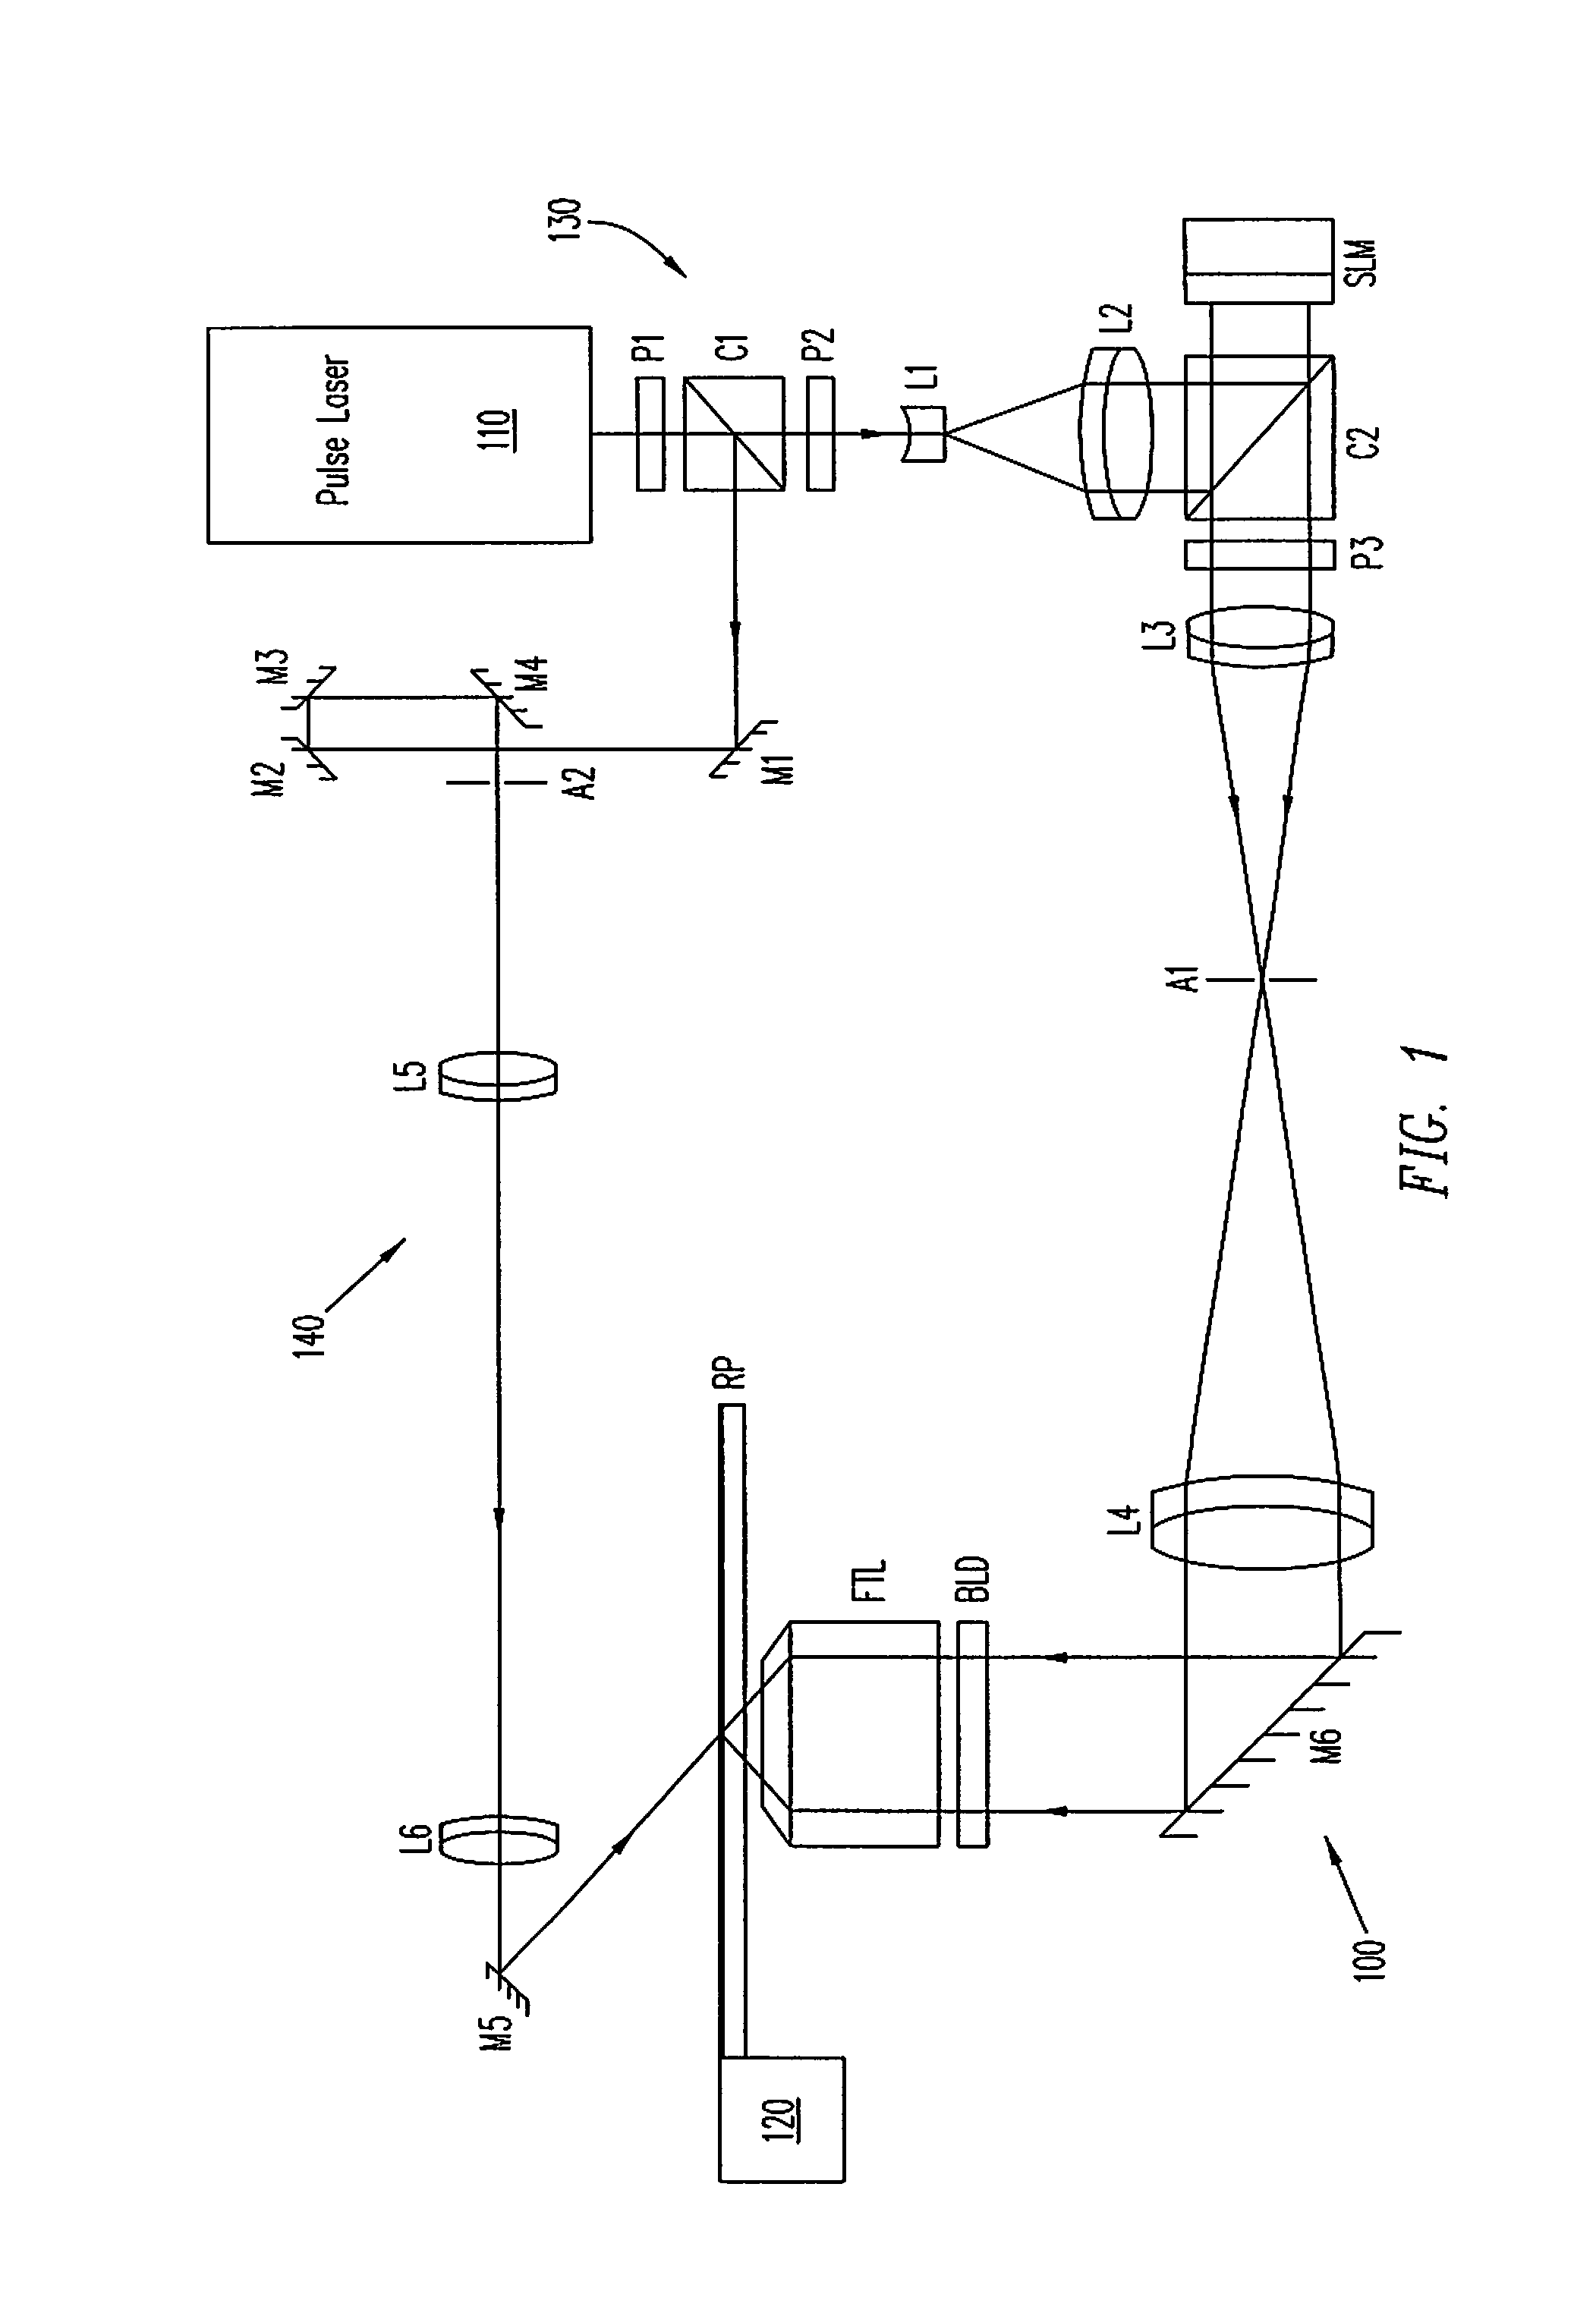 Systems and methods for producing wide field-of-view holographic displays